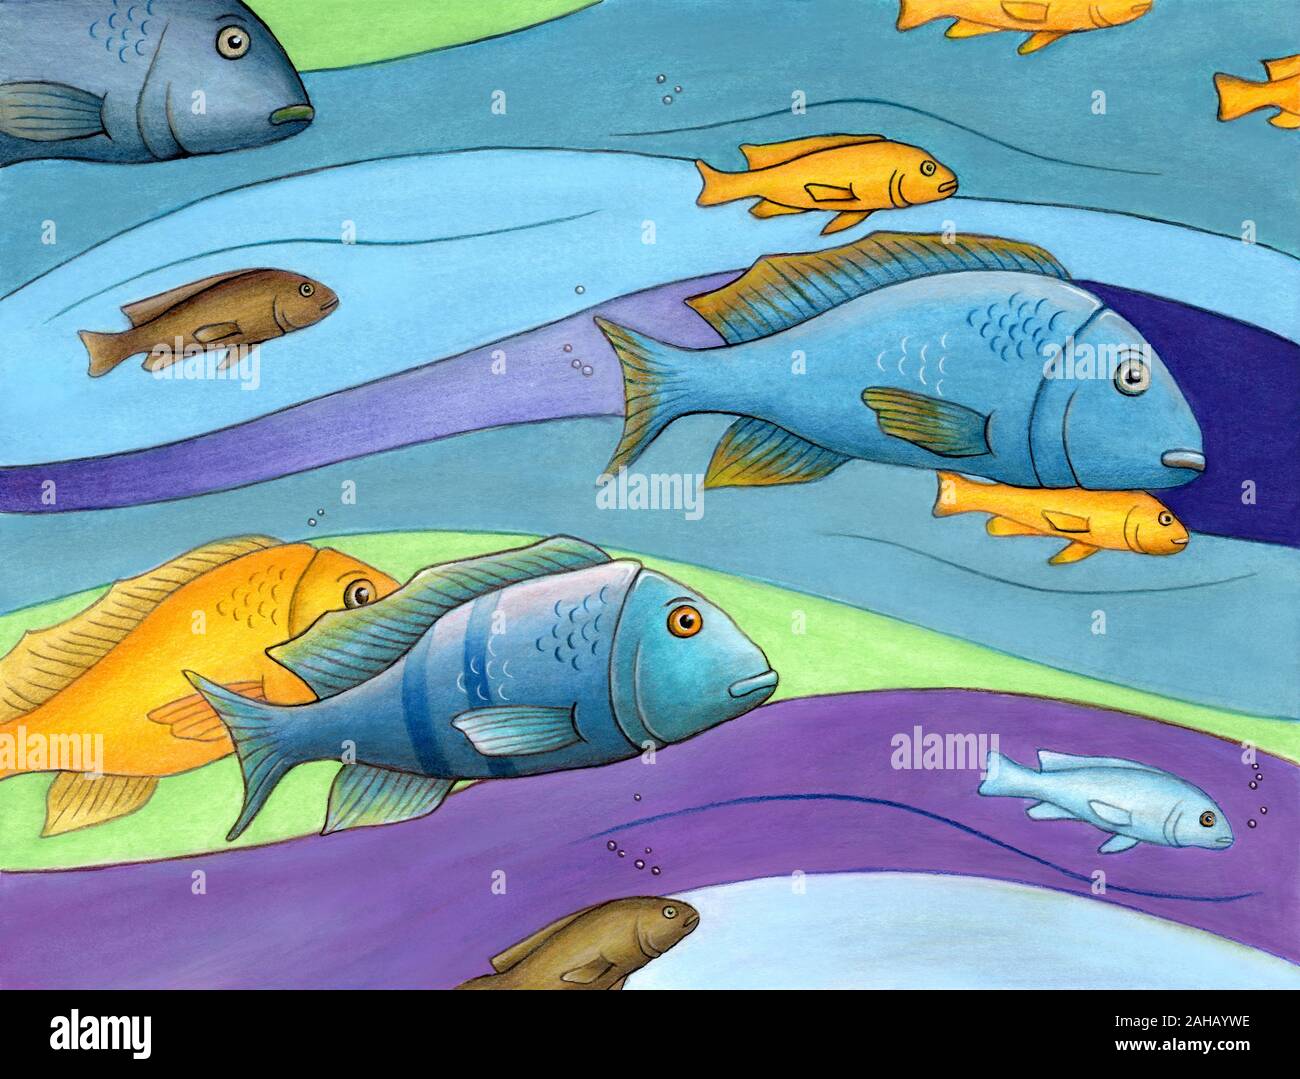 Decorative composition of some colorful fishes. Mixed media illustration on paper. Stock Photo